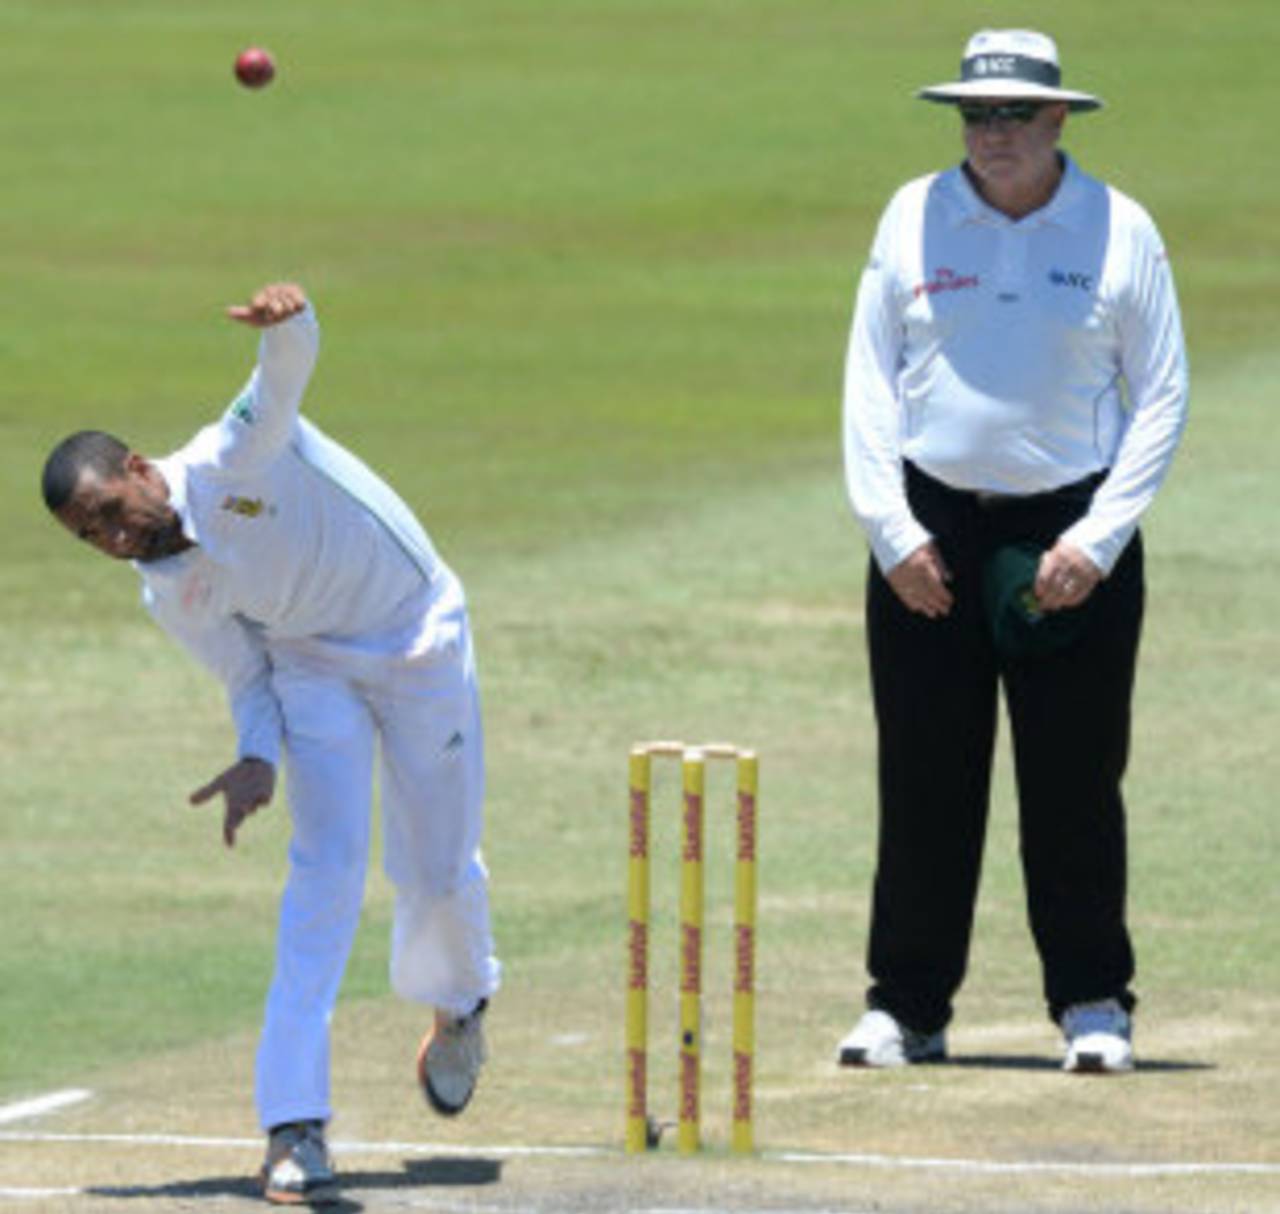 Robin Peterson in his delivery stride, South Africa v India, 2nd Test, Durban, 4th day, December 29, 2013